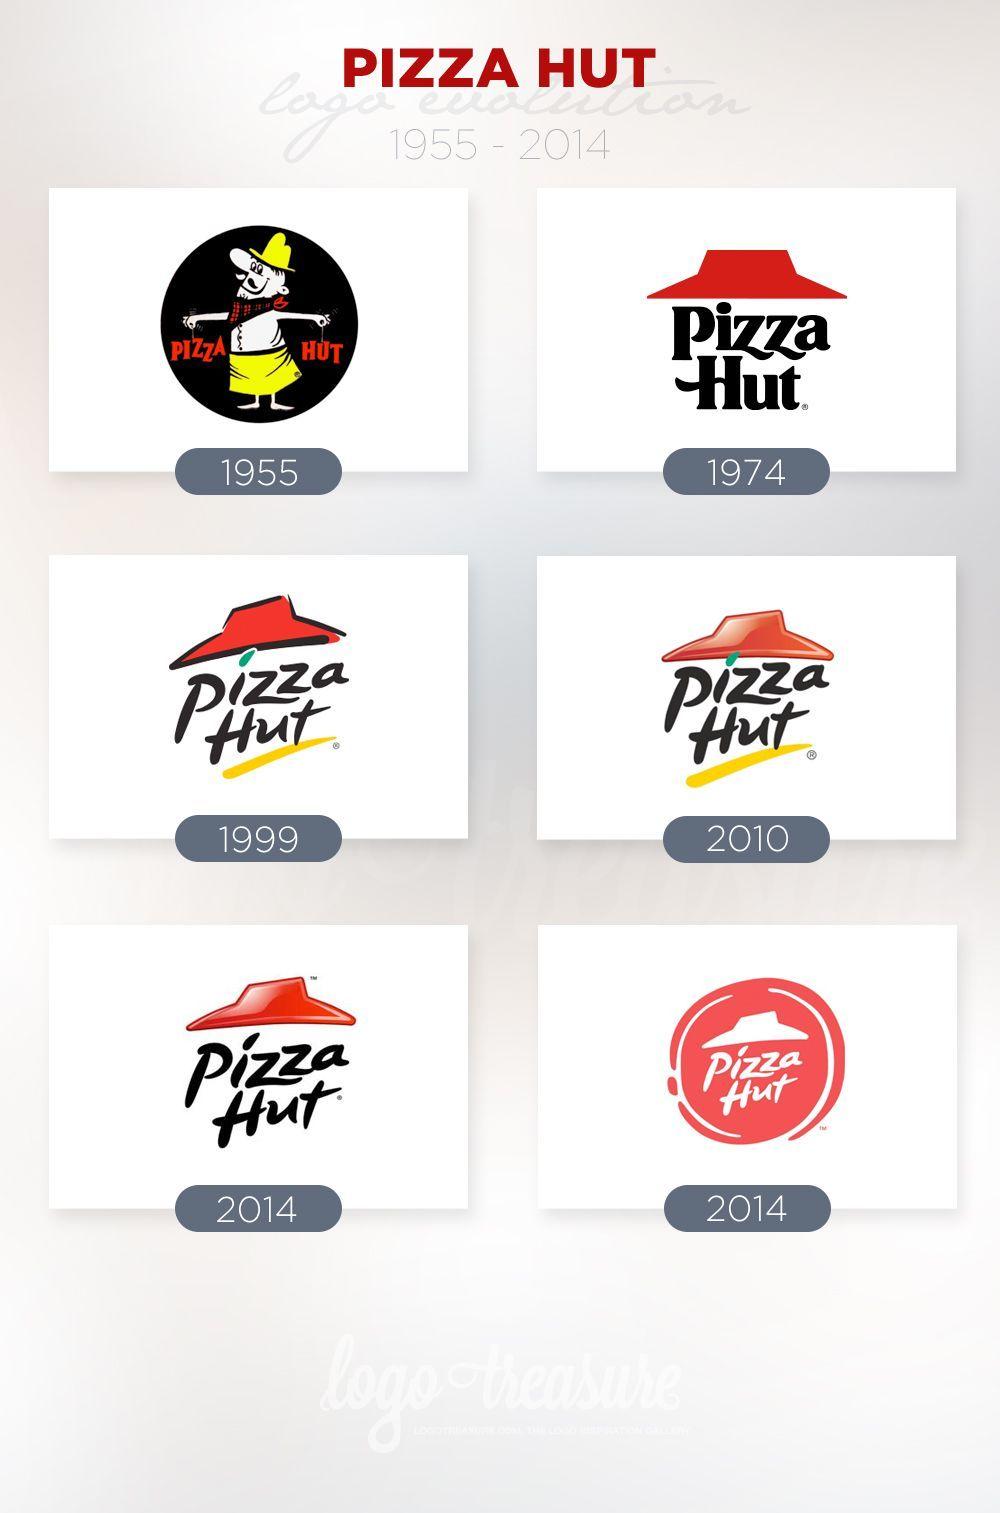 Pizza Hut Old Logo - Pizza Hut Logo Evolution from 1955 to 2014. Branding and Identity